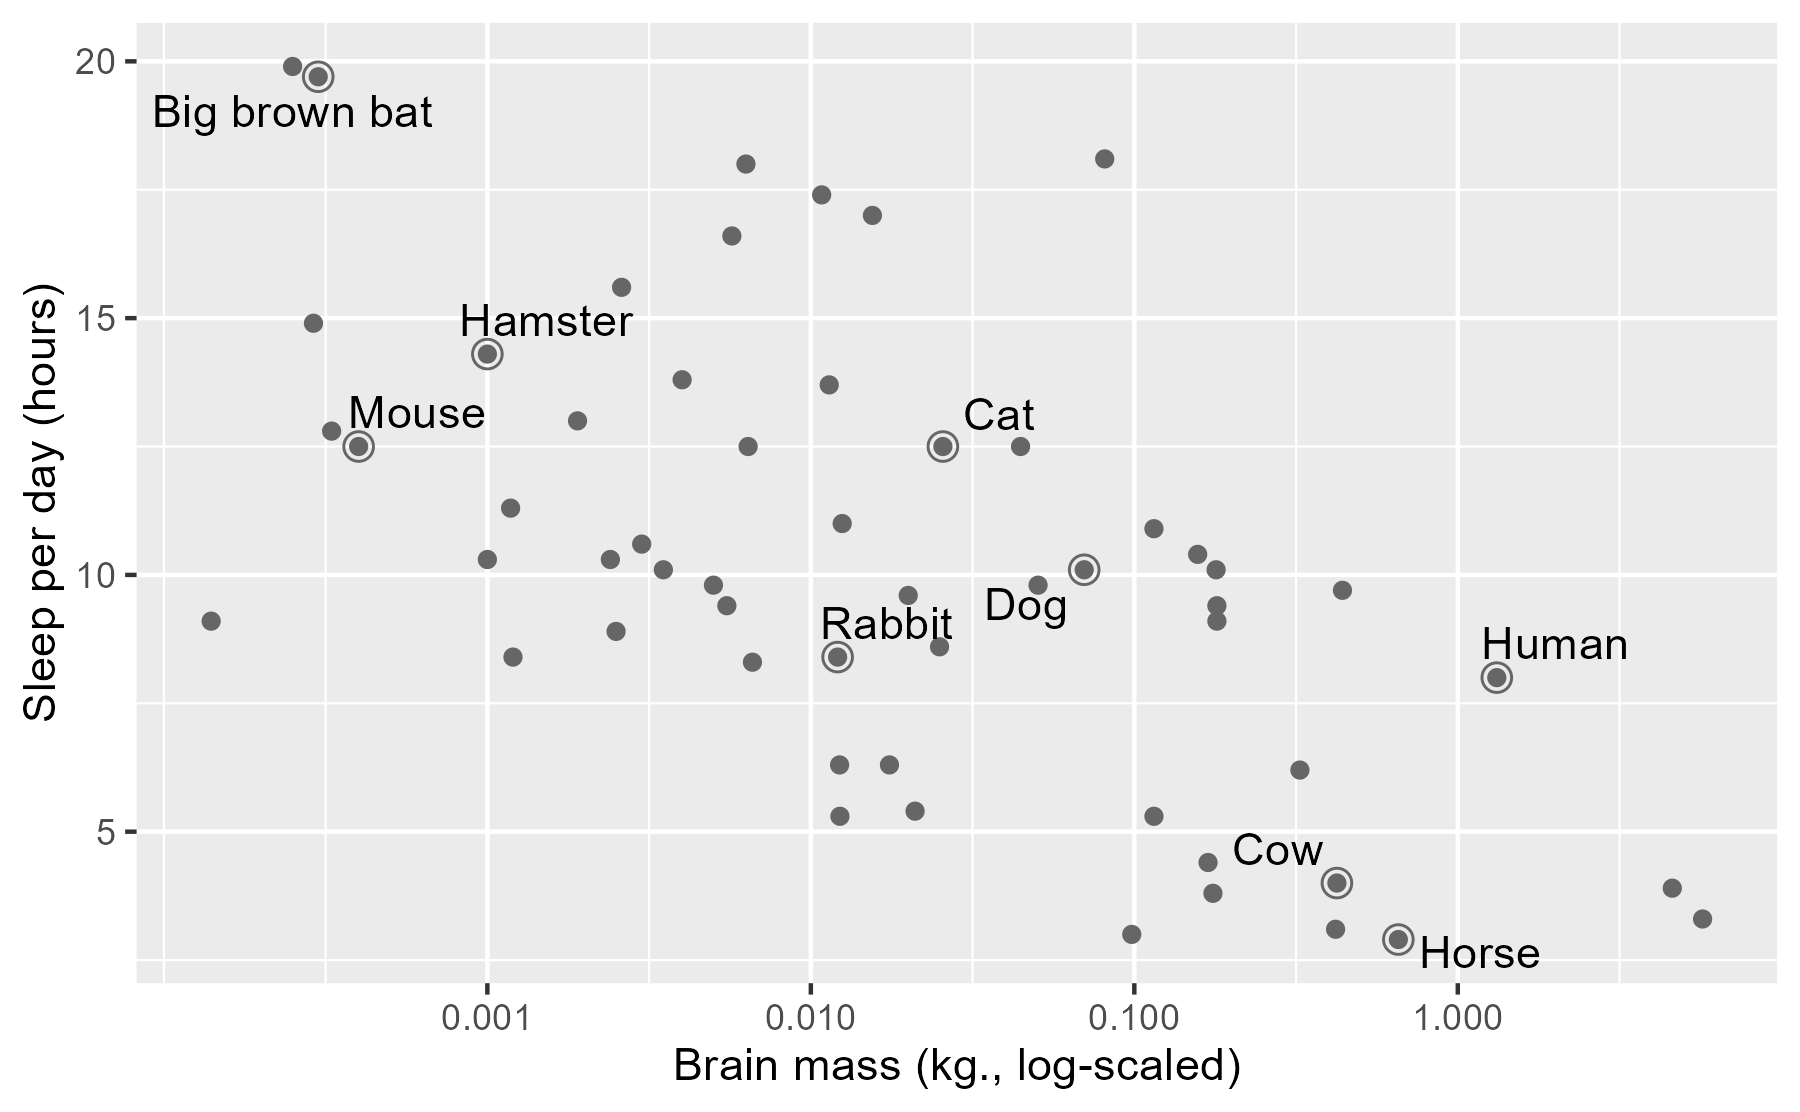 Brain mass by sleep hours, now with both on a log-10 scale. Some species have their data highlighted.